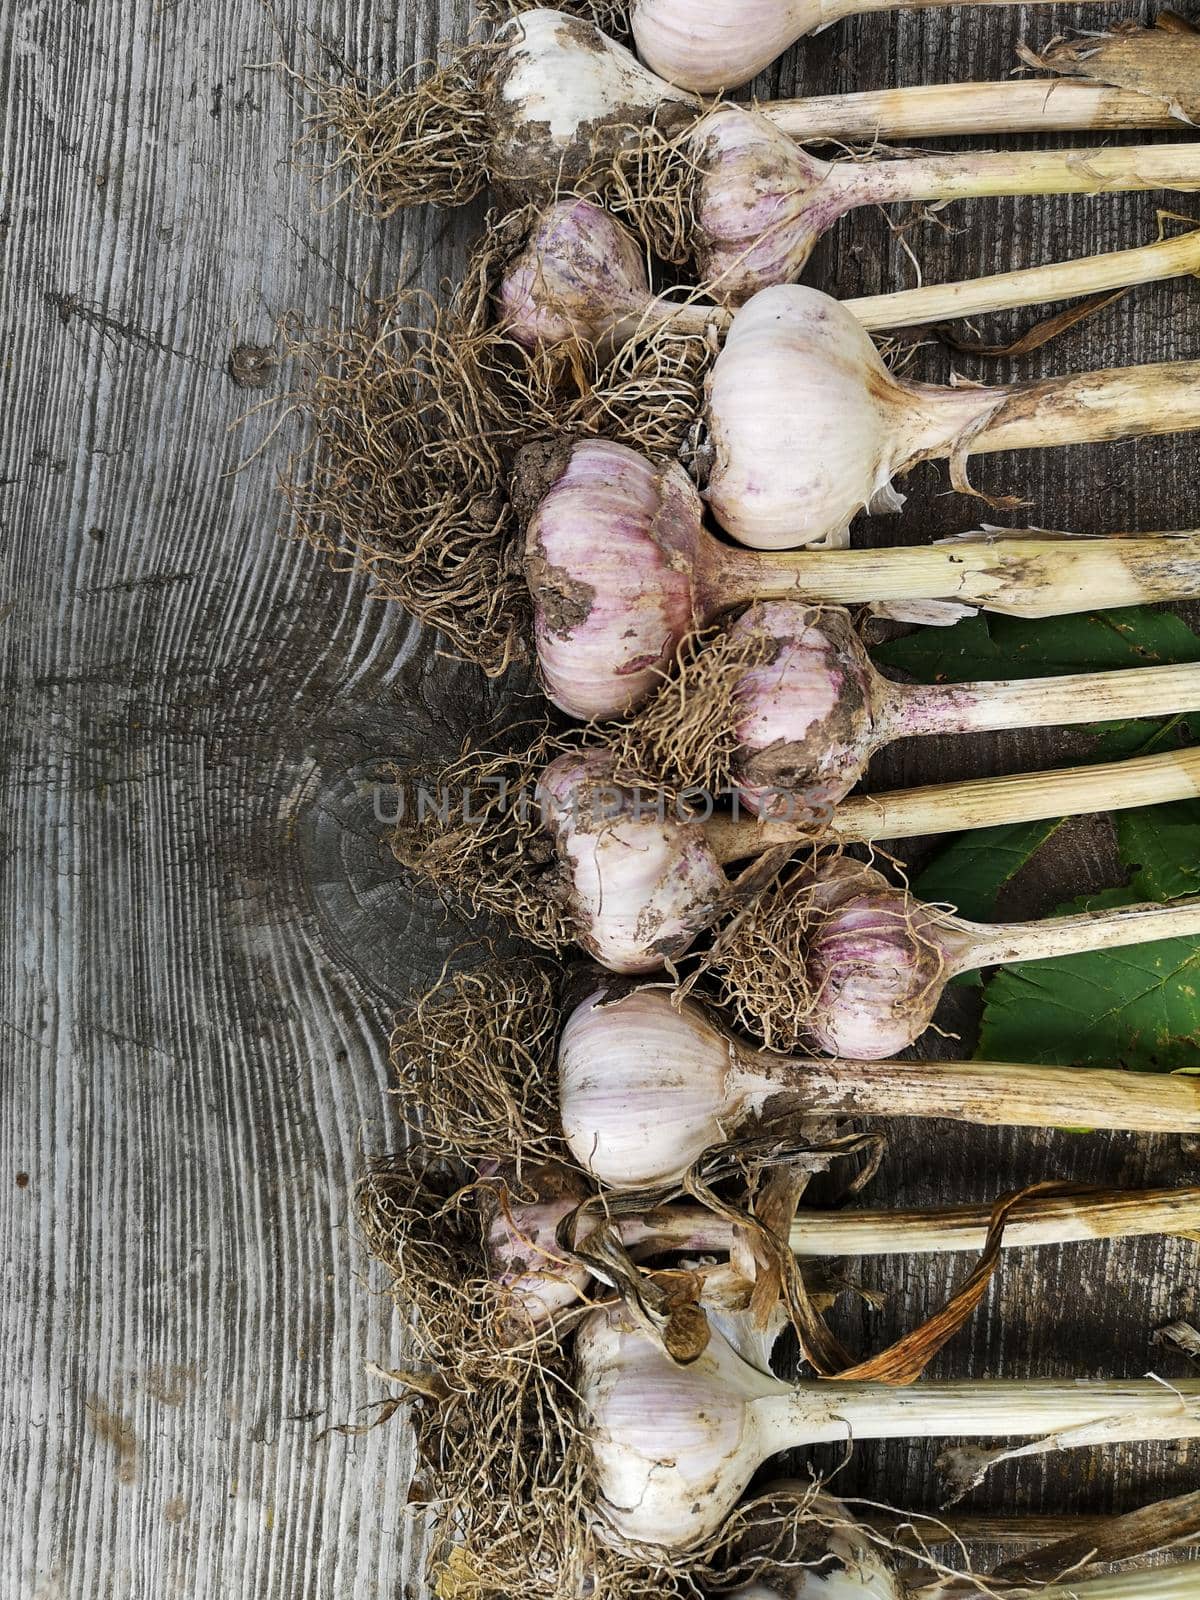 Freshly Picked Garlic Bulbs on a wooden and Dirt Background by galinasharapova